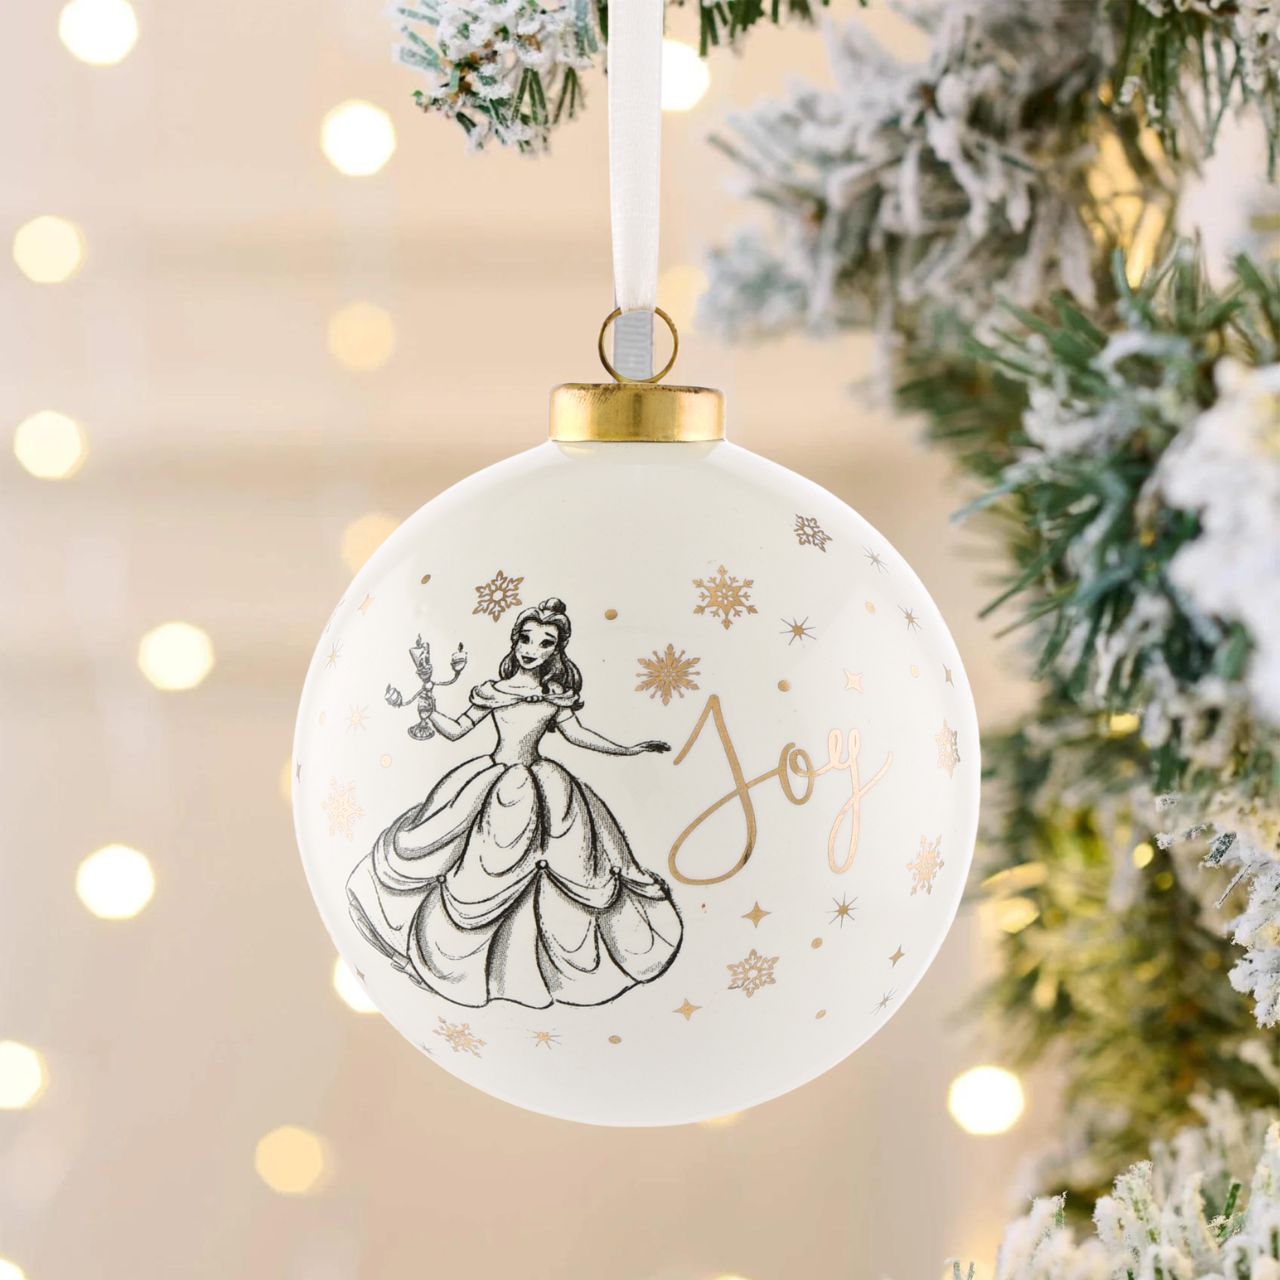 Disney Ceramic Christmas Bauble Belle  Bring touch of timeless Disney magic to the Christmas tree with this elegant gold foiled ceramic collectable Belle bauble. From Disney Classic Collectables - luxurious collectable gifts for the enduring Disney fan.